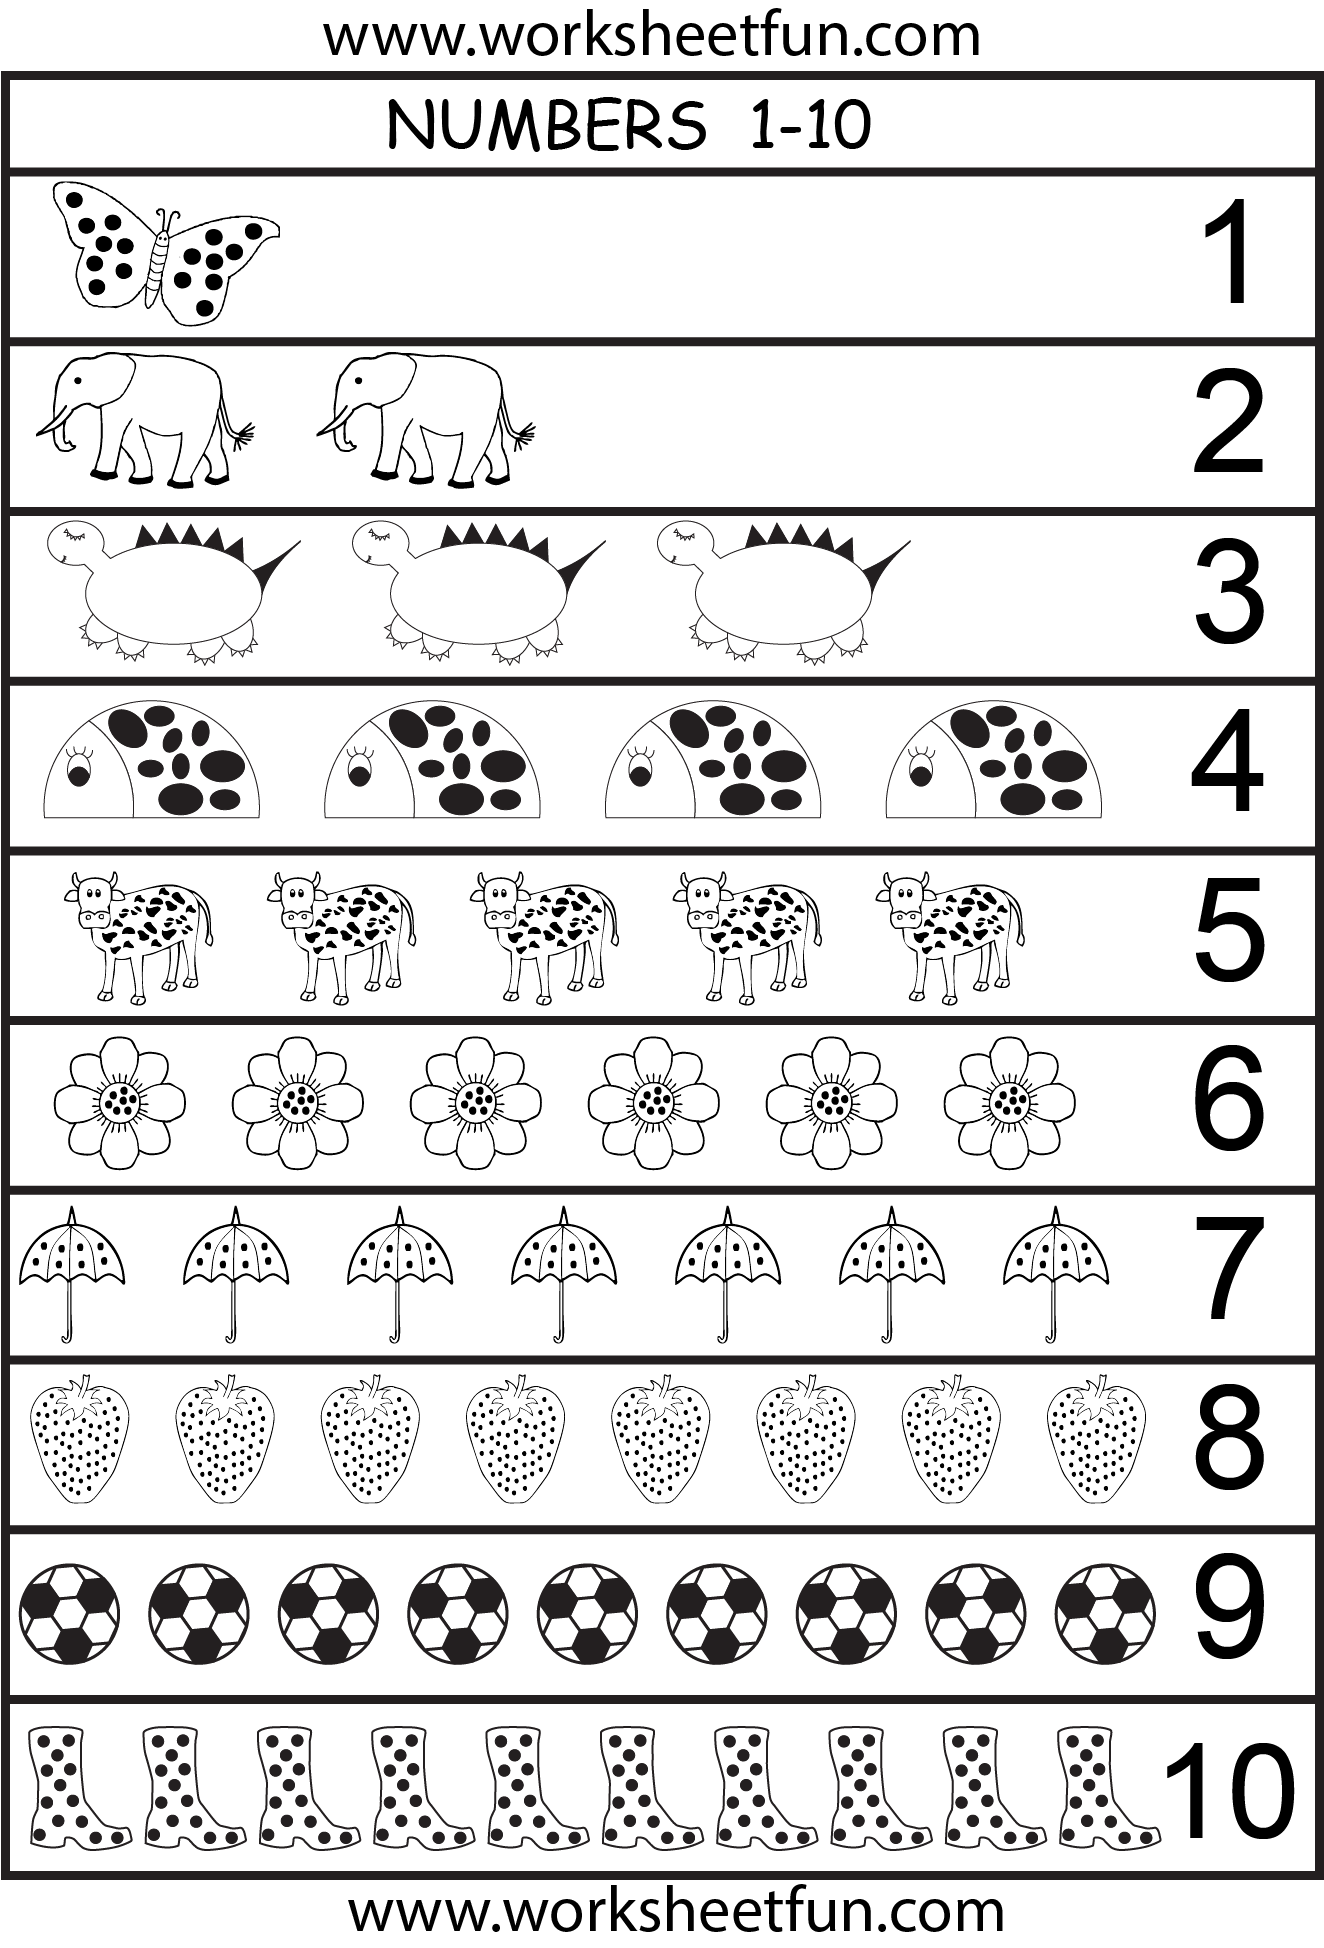 Free Counting Worksheets 1 10